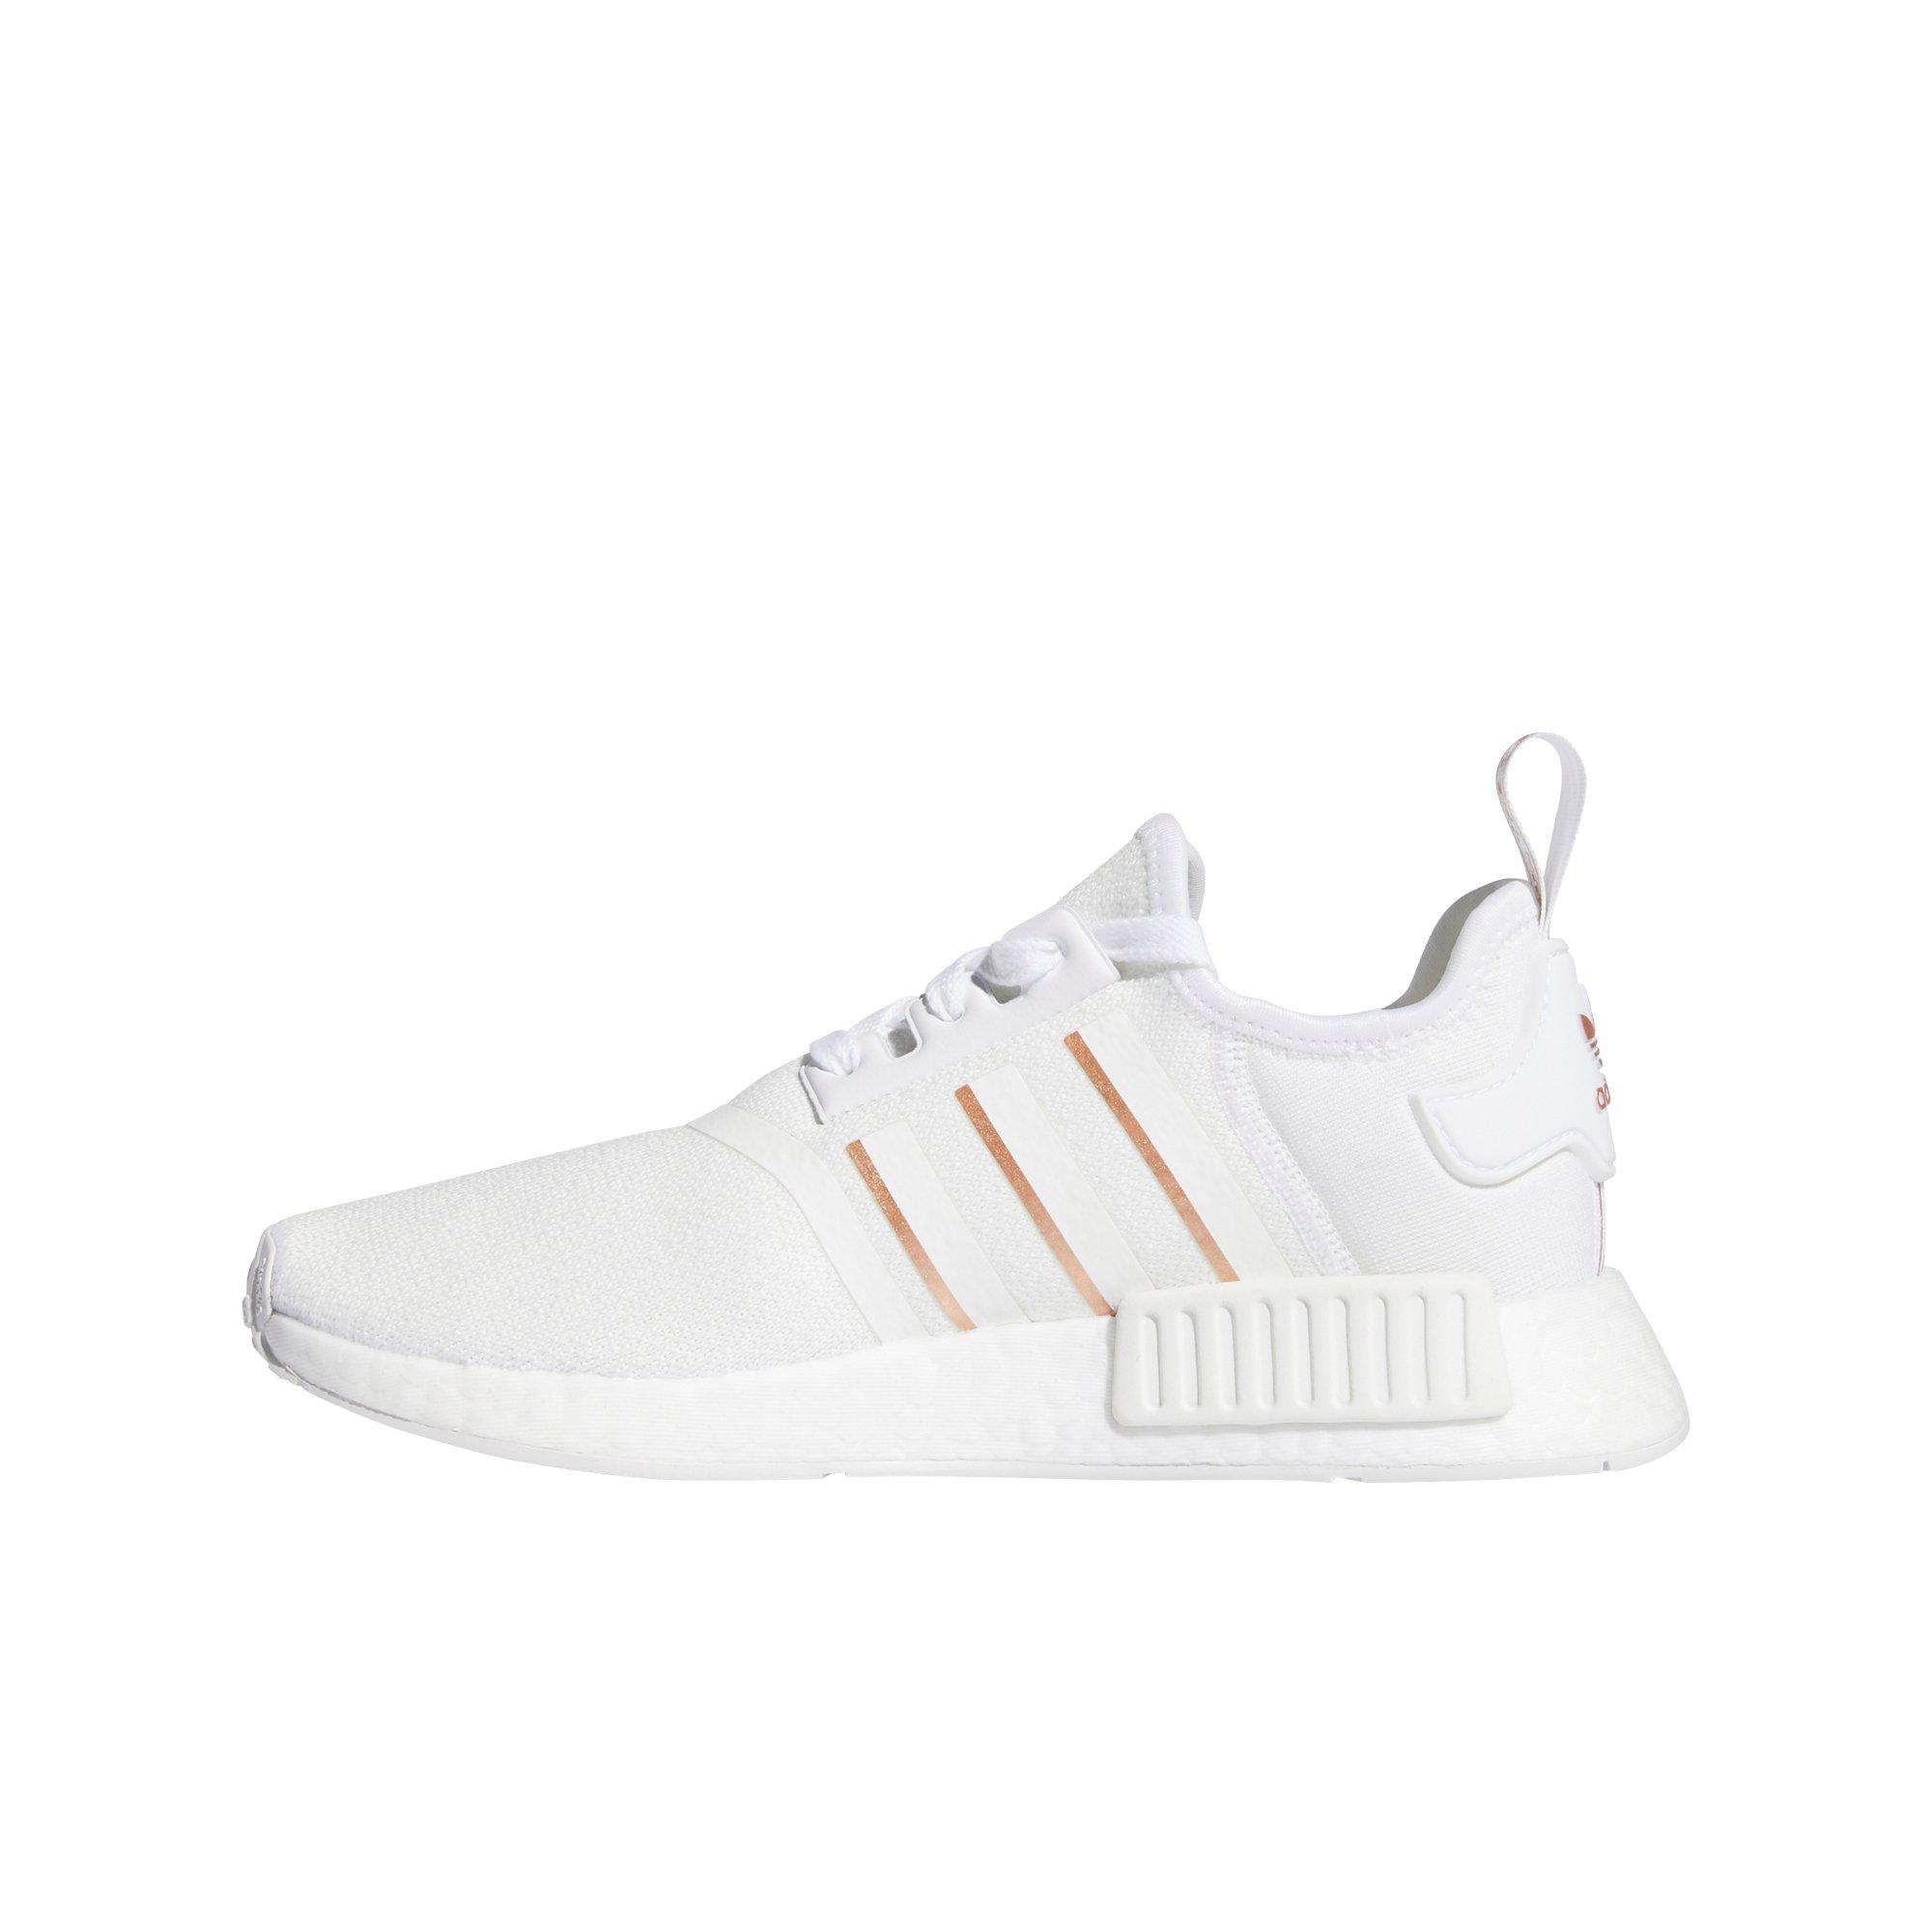 nmd_r1 shoes white and gold